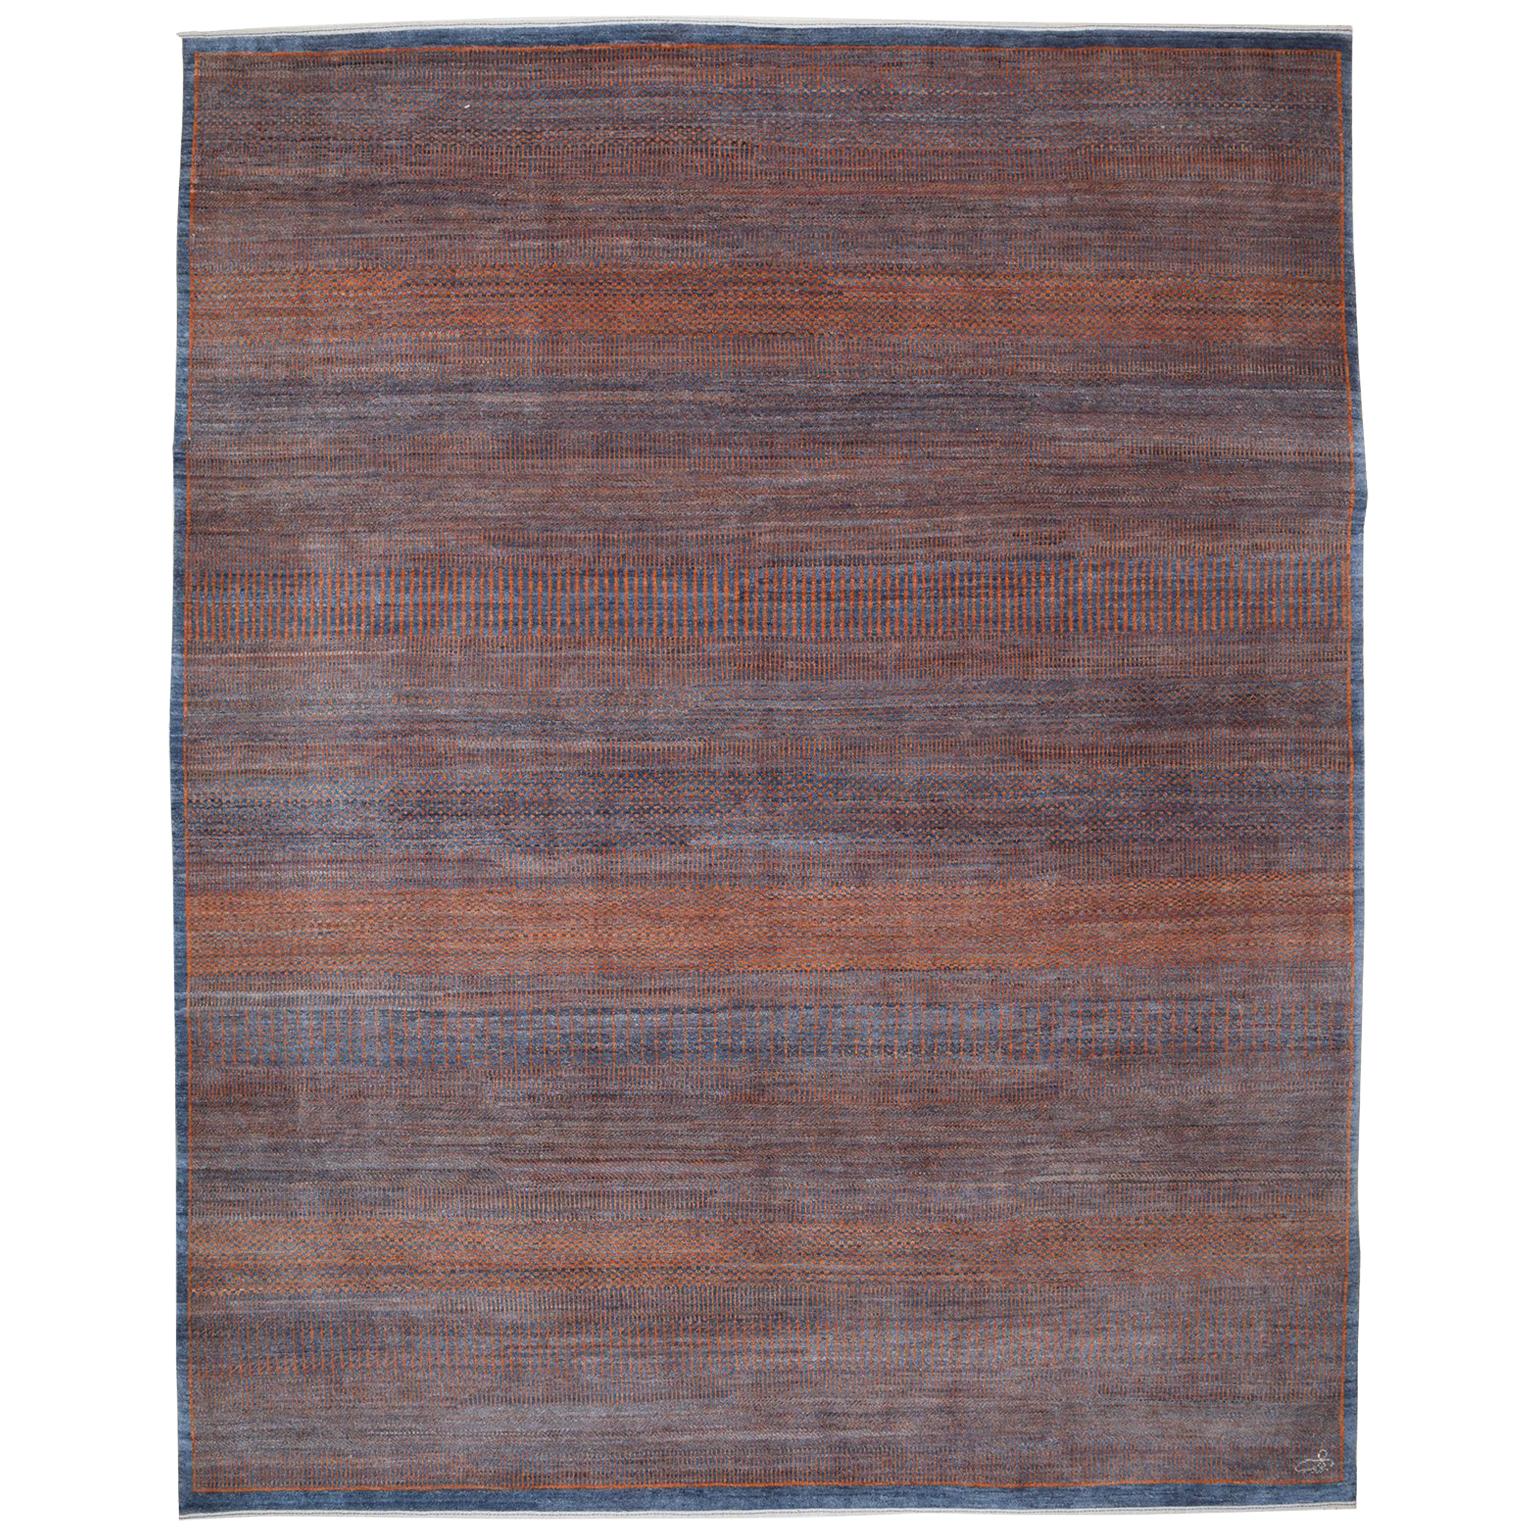 Orley Shabahang Signature “Rain No. 1” Carpet in Pure Wool and Organic Dyes